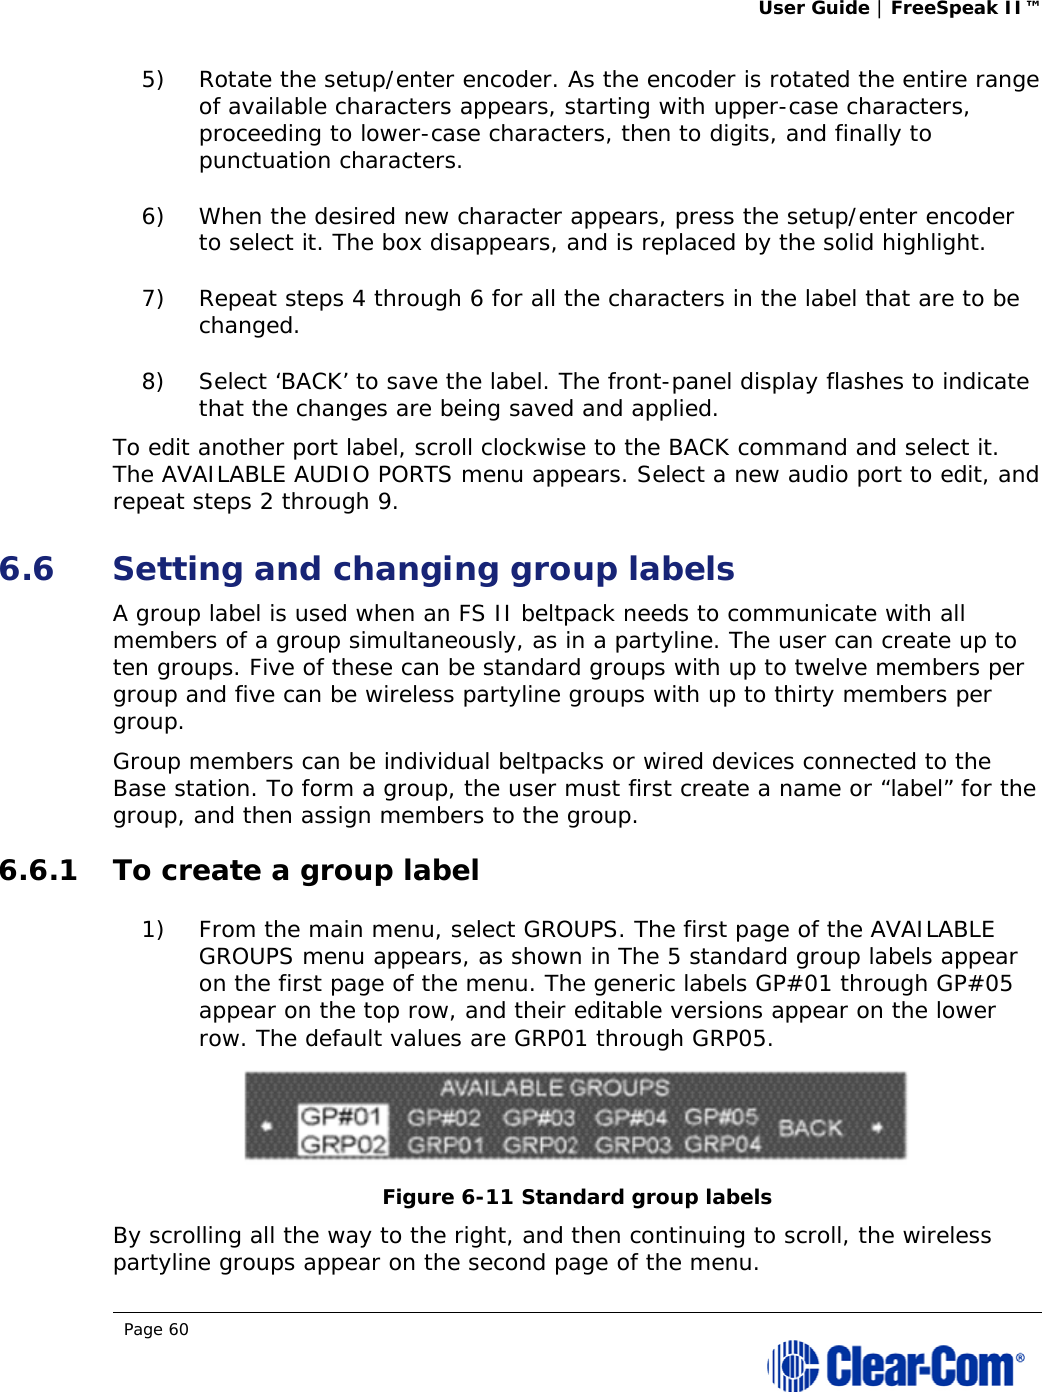 User Guide | FreeSpeak II™  Page 60  5) Rotate the setup/enter encoder. As the encoder is rotated the entire range of available characters appears, starting with upper-case characters, proceeding to lower-case characters, then to digits, and finally to punctuation characters.  6) When the desired new character appears, press the setup/enter encoder to select it. The box disappears, and is replaced by the solid highlight. 7) Repeat steps 4 through 6 for all the characters in the label that are to be changed.  8) Select ‘BACK’ to save the label. The front-panel display flashes to indicate that the changes are being saved and applied.  To edit another port label, scroll clockwise to the BACK command and select it. The AVAILABLE AUDIO PORTS menu appears. Select a new audio port to edit, and repeat steps 2 through 9. 6.6 Setting and changing group labels A group label is used when an FS II beltpack needs to communicate with all members of a group simultaneously, as in a partyline. The user can create up to ten groups. Five of these can be standard groups with up to twelve members per group and five can be wireless partyline groups with up to thirty members per group.  Group members can be individual beltpacks or wired devices connected to the Base station. To form a group, the user must first create a name or “label” for the group, and then assign members to the group.  6.6.1 To create a group label 1) From the main menu, select GROUPS. The first page of the AVAILABLE GROUPS menu appears, as shown in The 5 standard group labels appear on the first page of the menu. The generic labels GP#01 through GP#05 appear on the top row, and their editable versions appear on the lower row. The default values are GRP01 through GRP05.  Figure 6-11 Standard group labels By scrolling all the way to the right, and then continuing to scroll, the wireless partyline groups appear on the second page of the menu. 